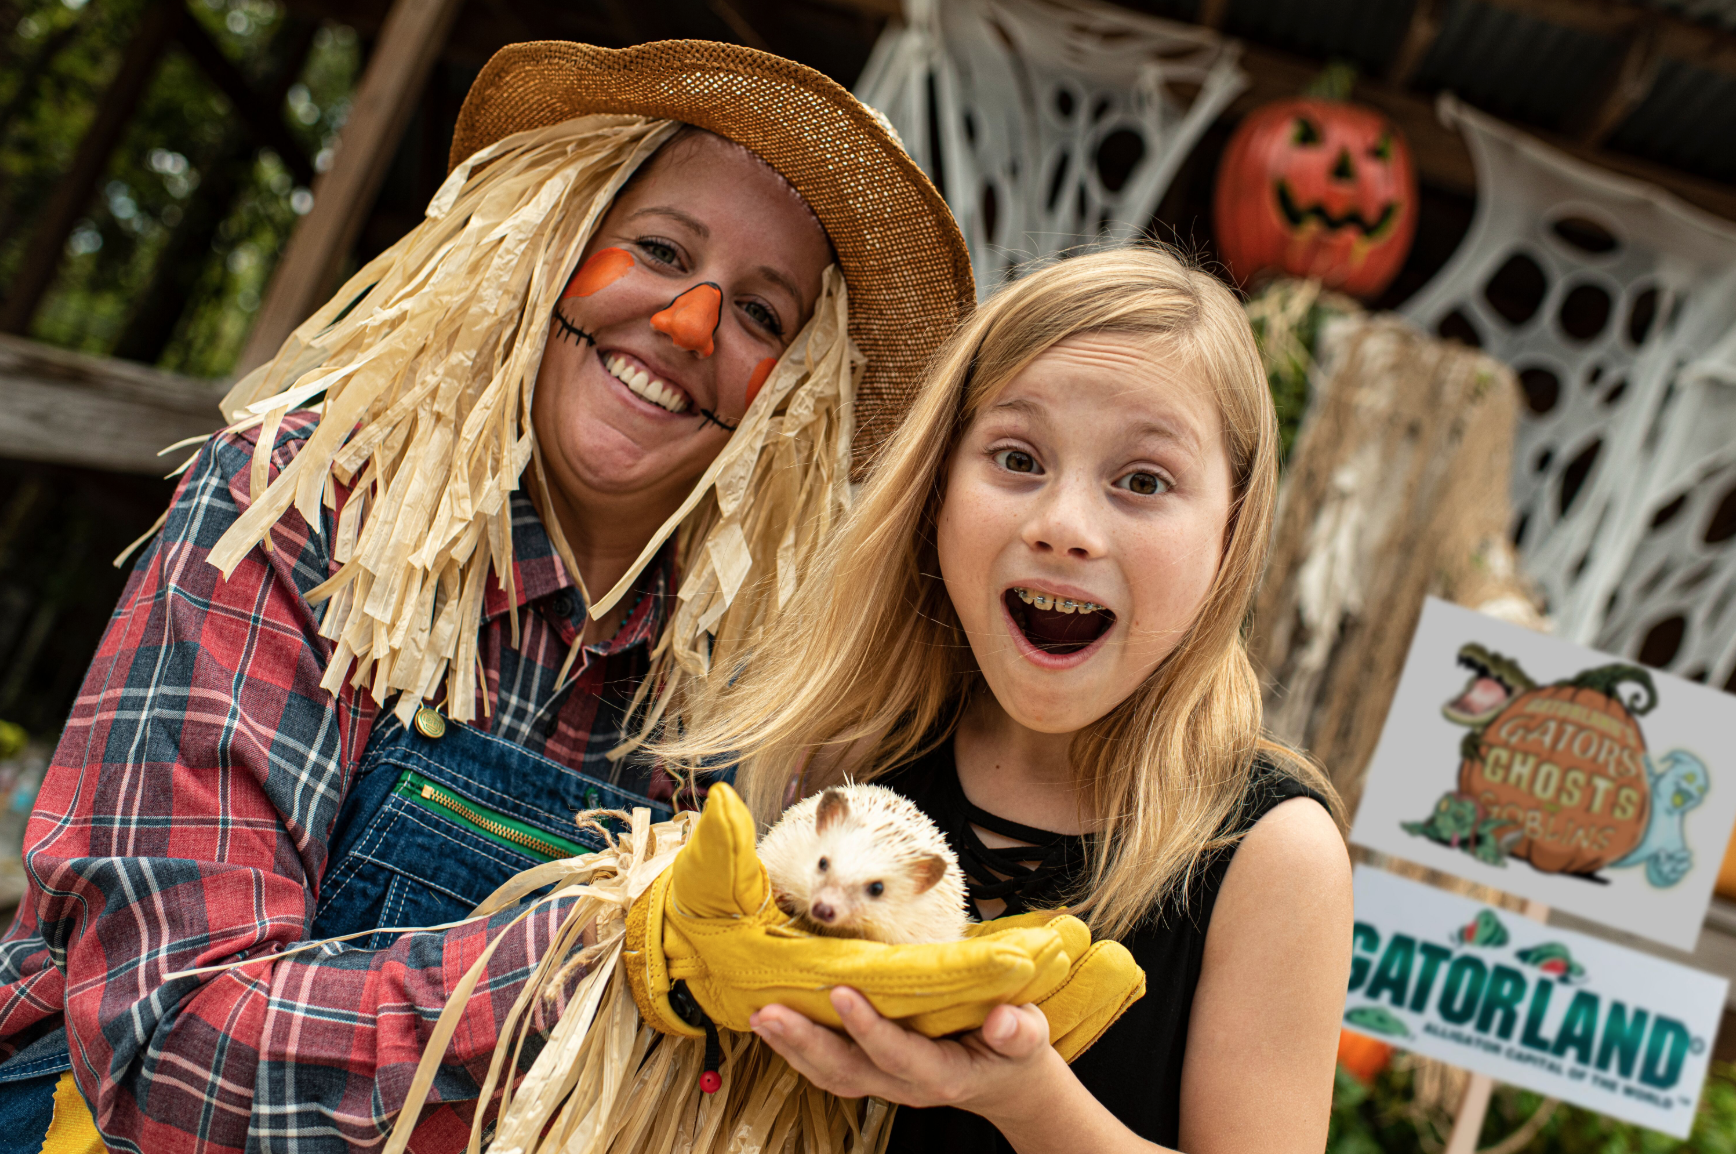 Halloween Orlando: Gatorland’s Gators, Ghosts And Goblins: image of girl holding a porcupine at Gatorland